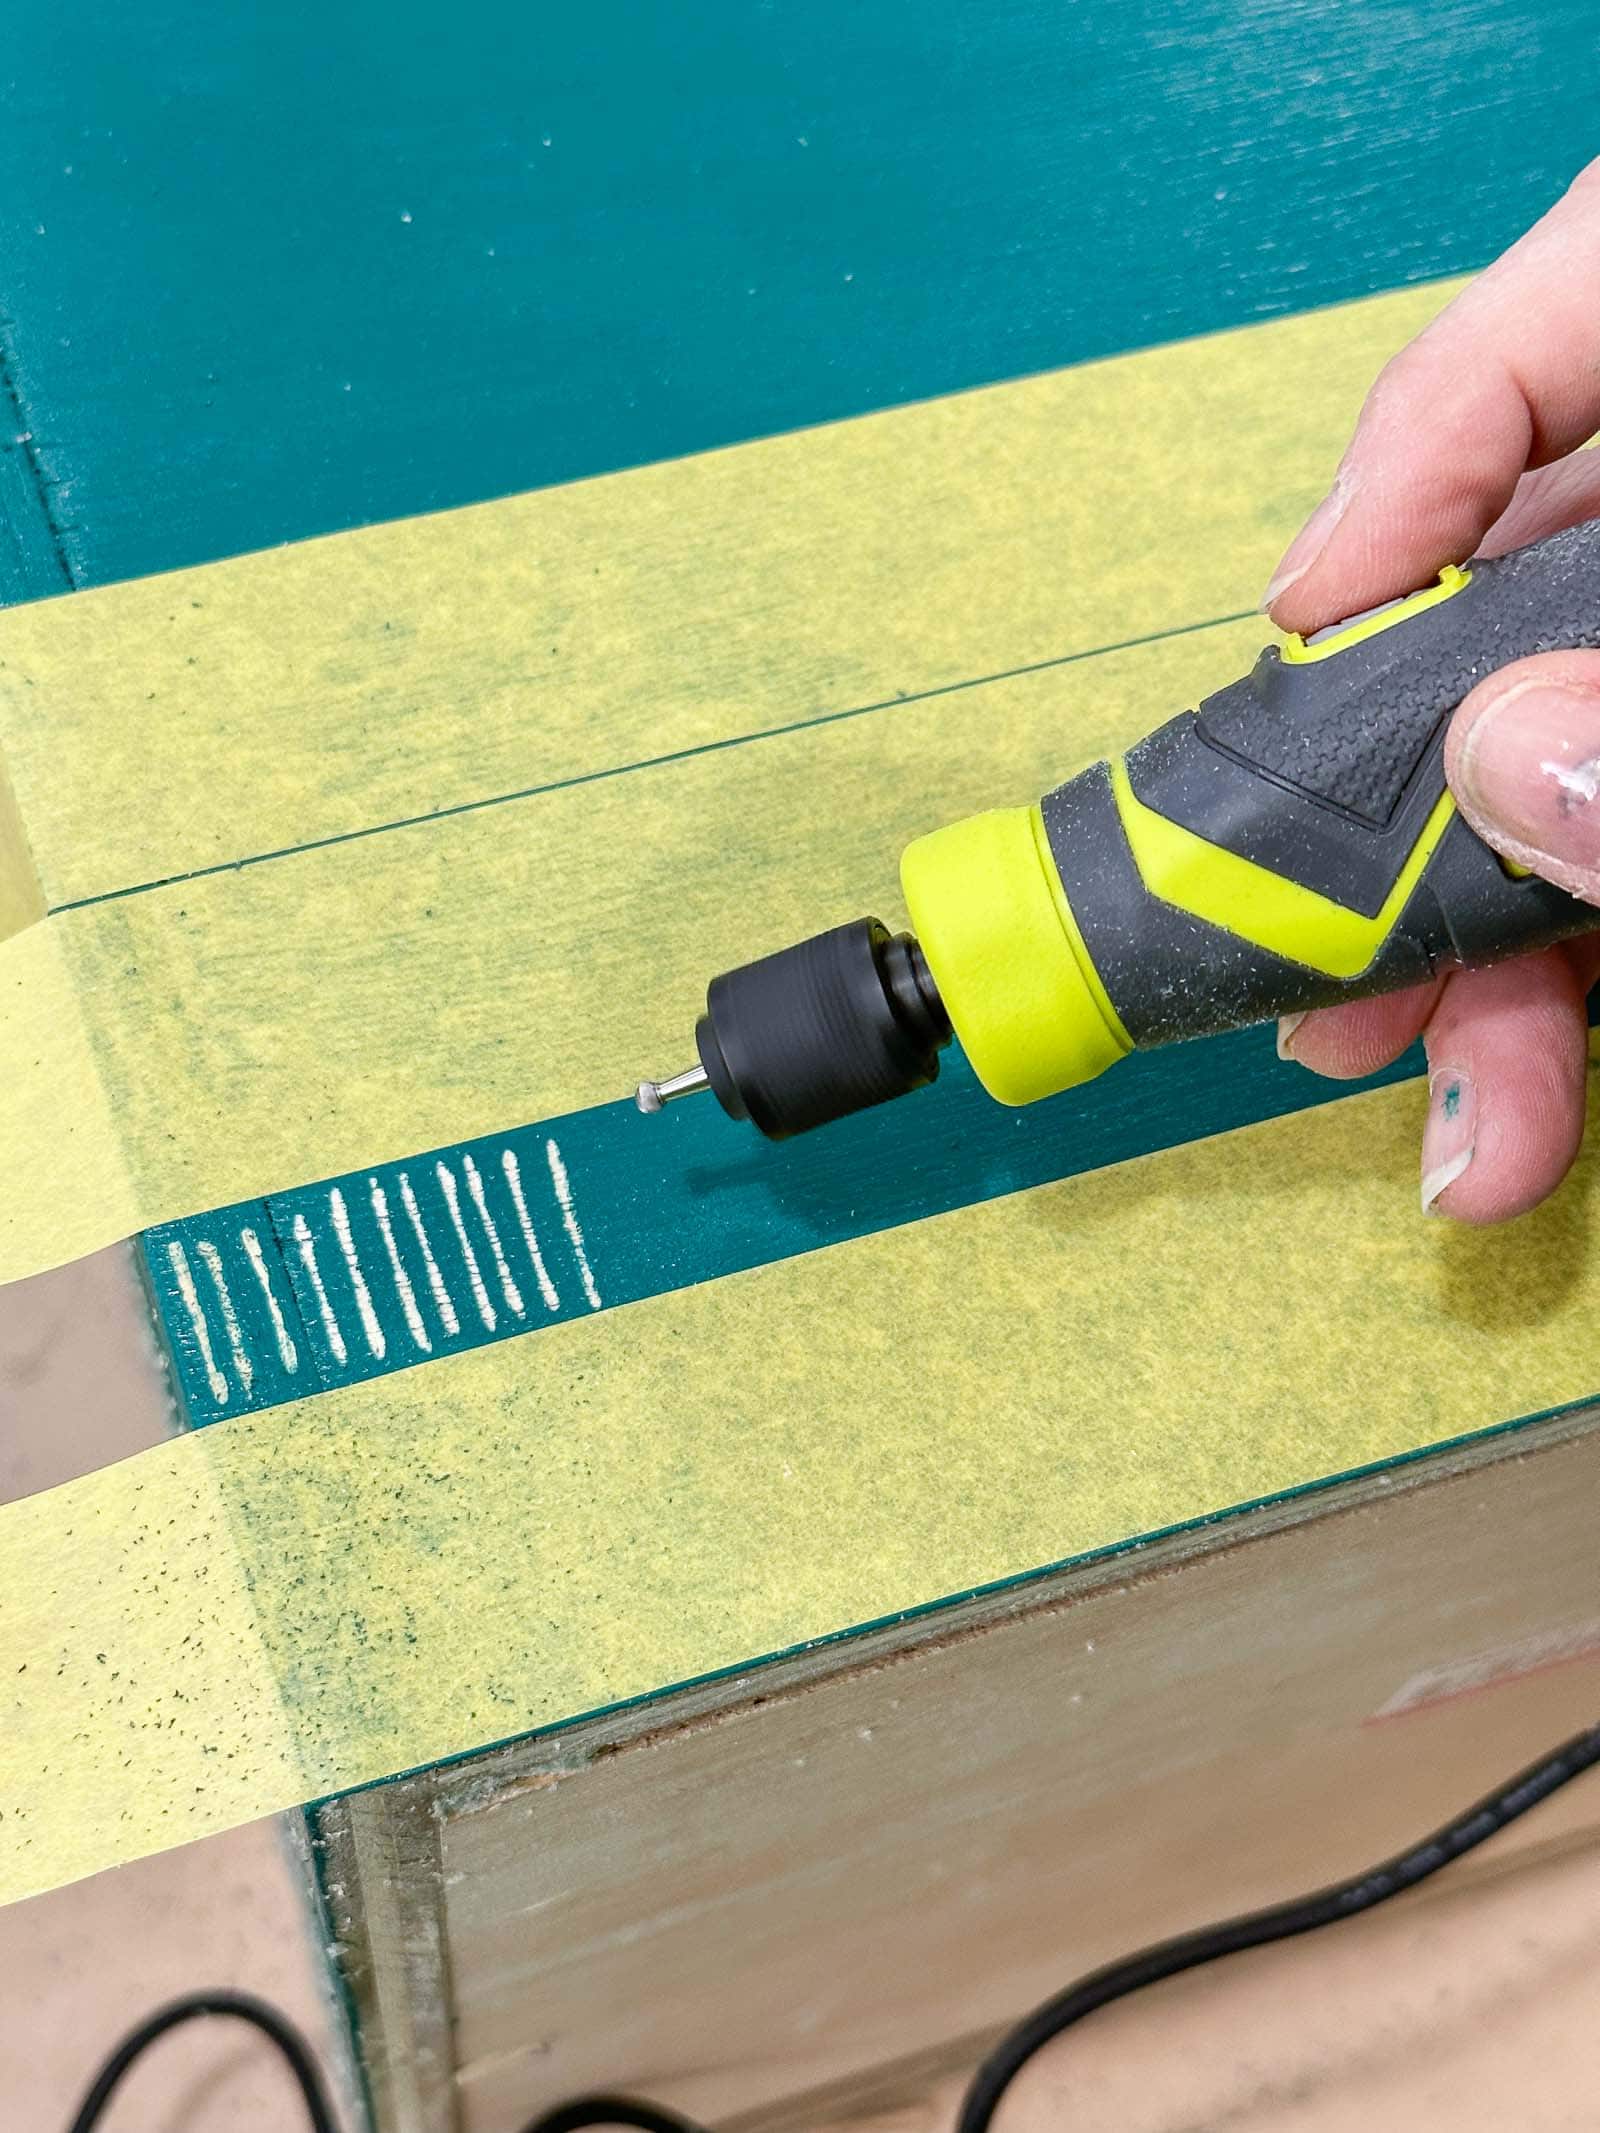 etching the planter box with rotary tool